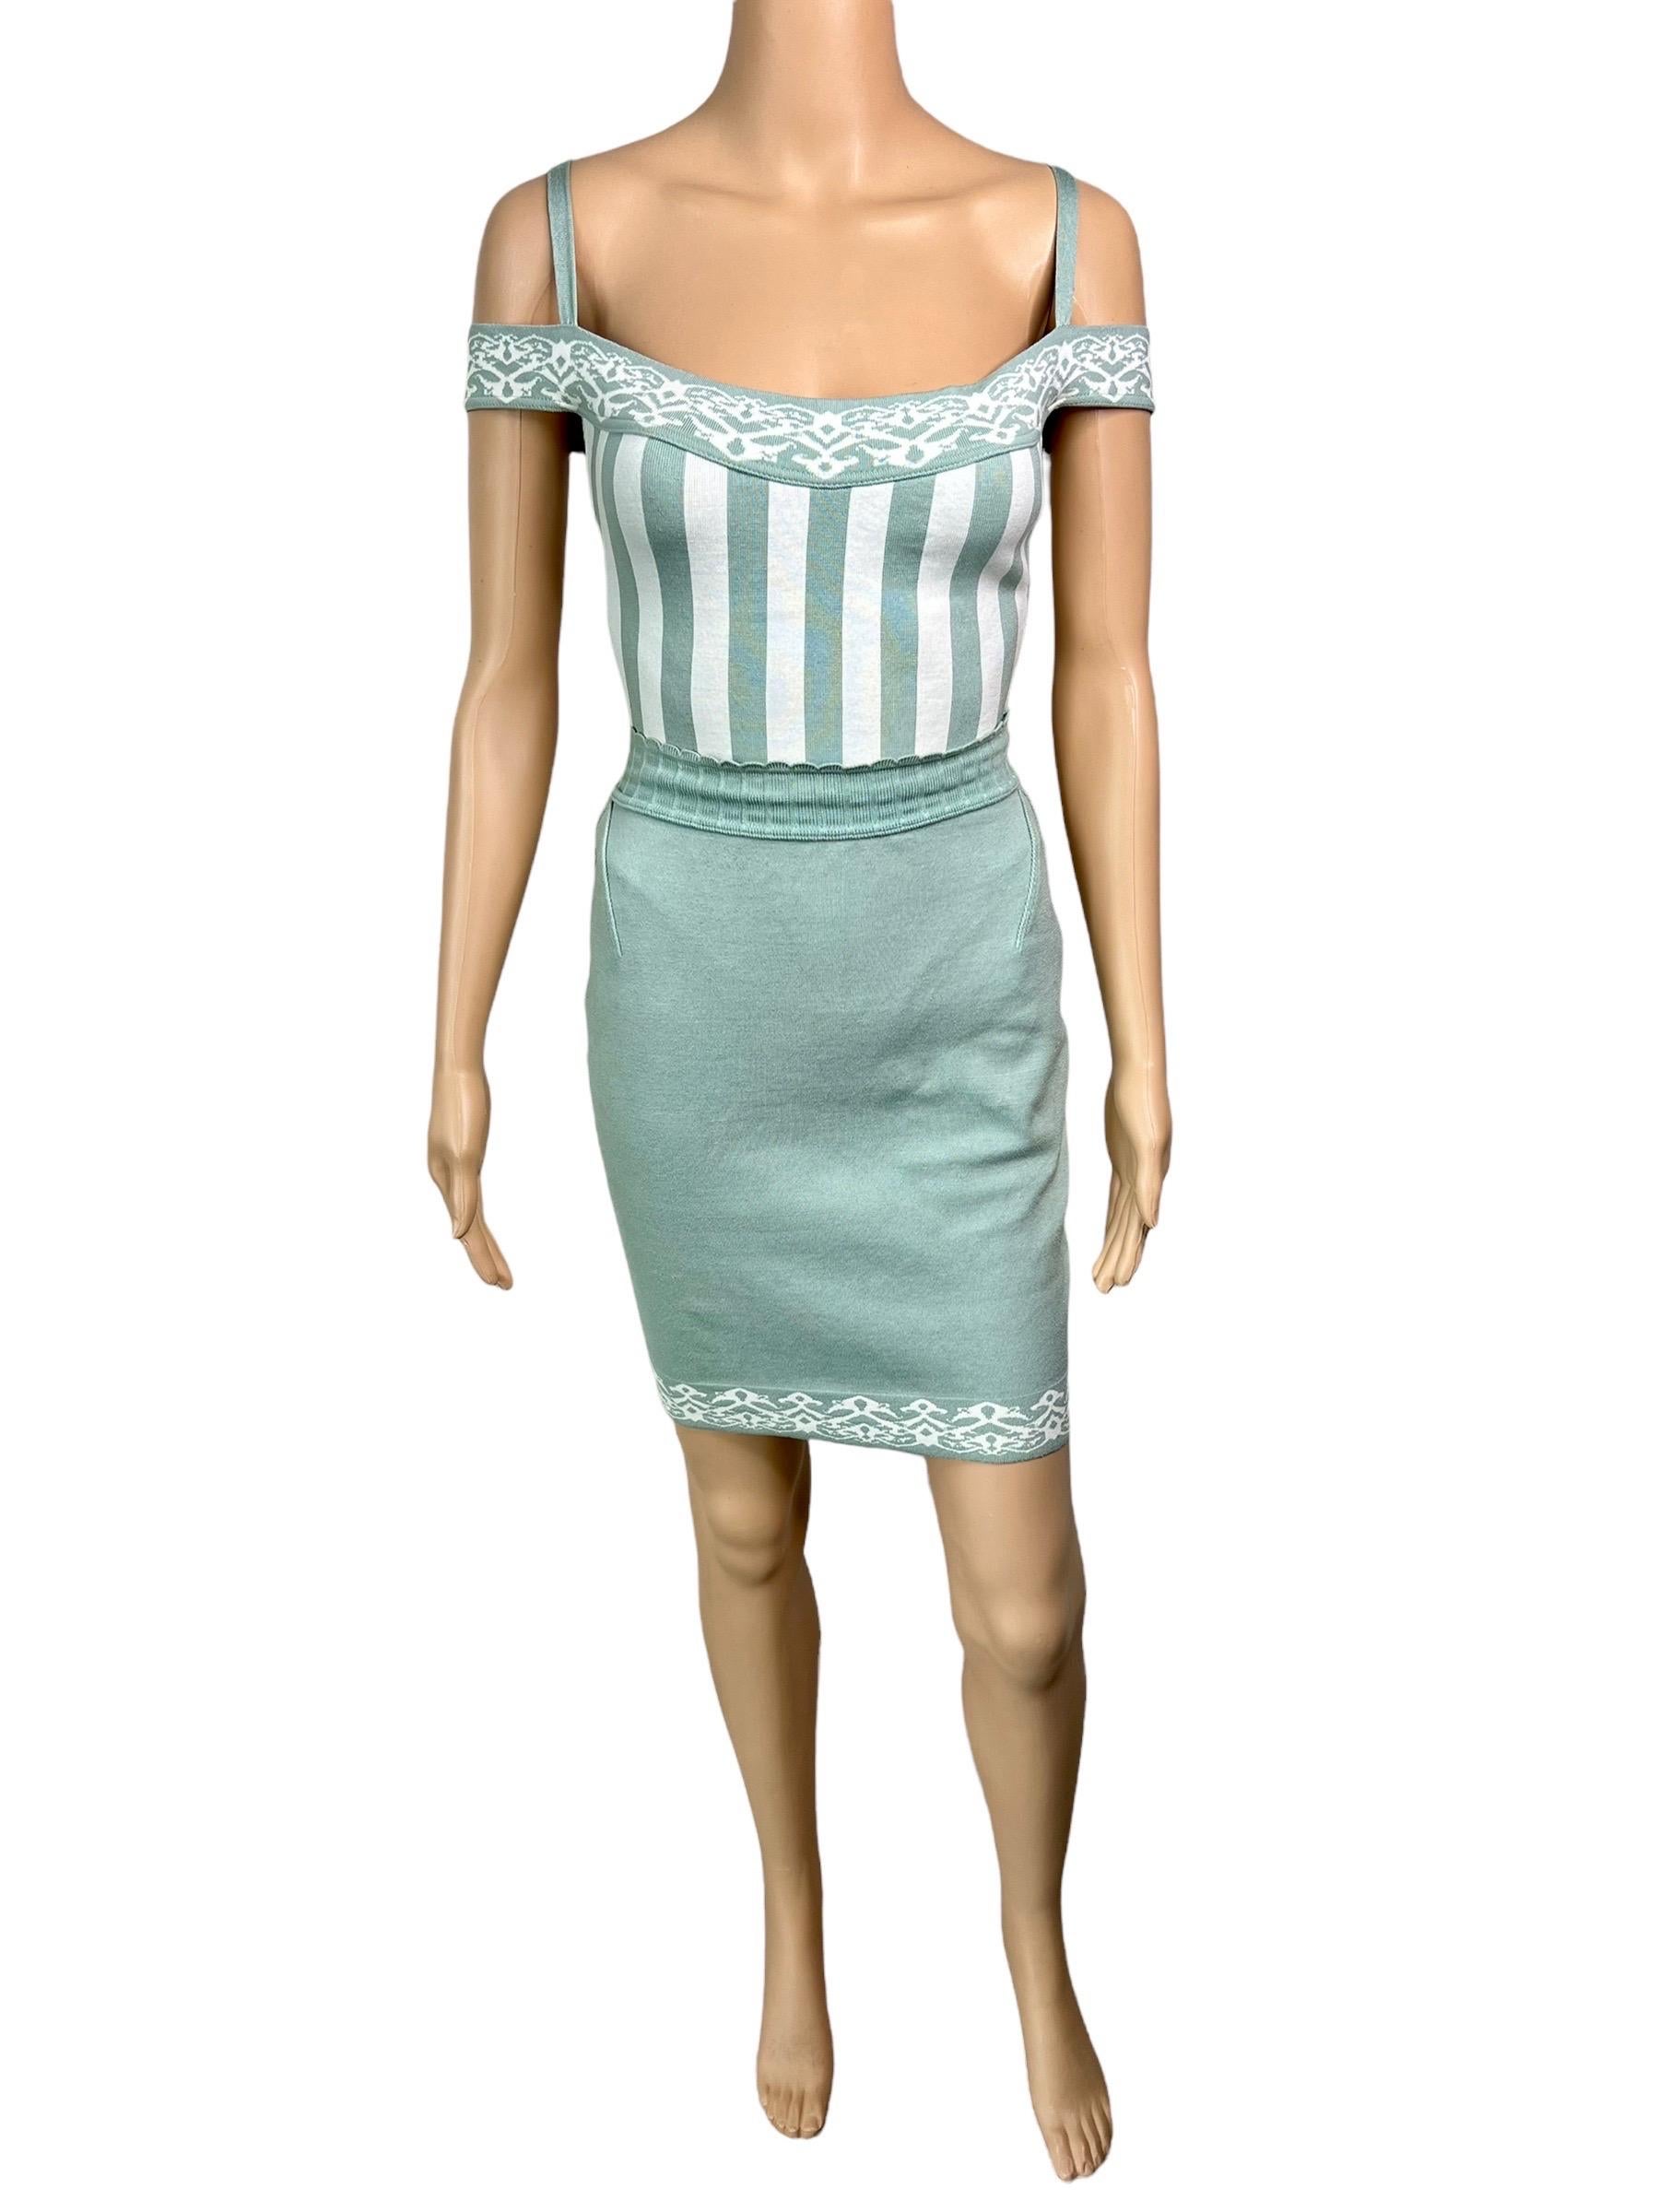 Azzedine Alaia S/S 1992 Vintage Striped Bodysuit Top and Mini Skirt 2 Piece Set In Good Condition For Sale In Naples, FL